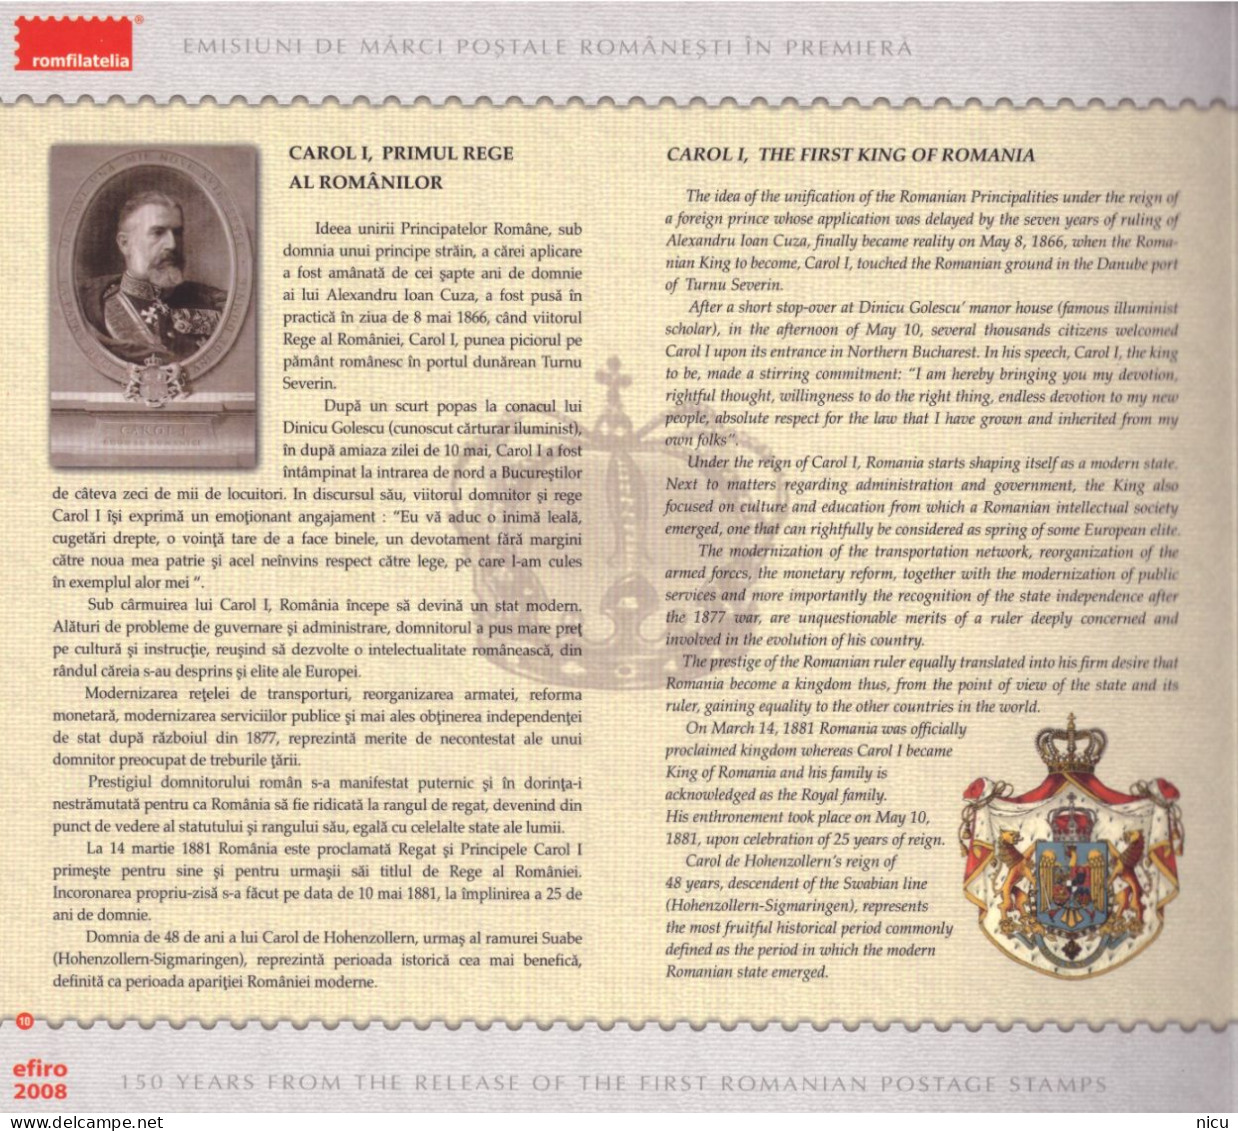 2008 - 150 YEARS FROM THE RELEASE OF THE FIRST ROMANIAN POSTAGE STAMPS - PHILATELIC ALBUM